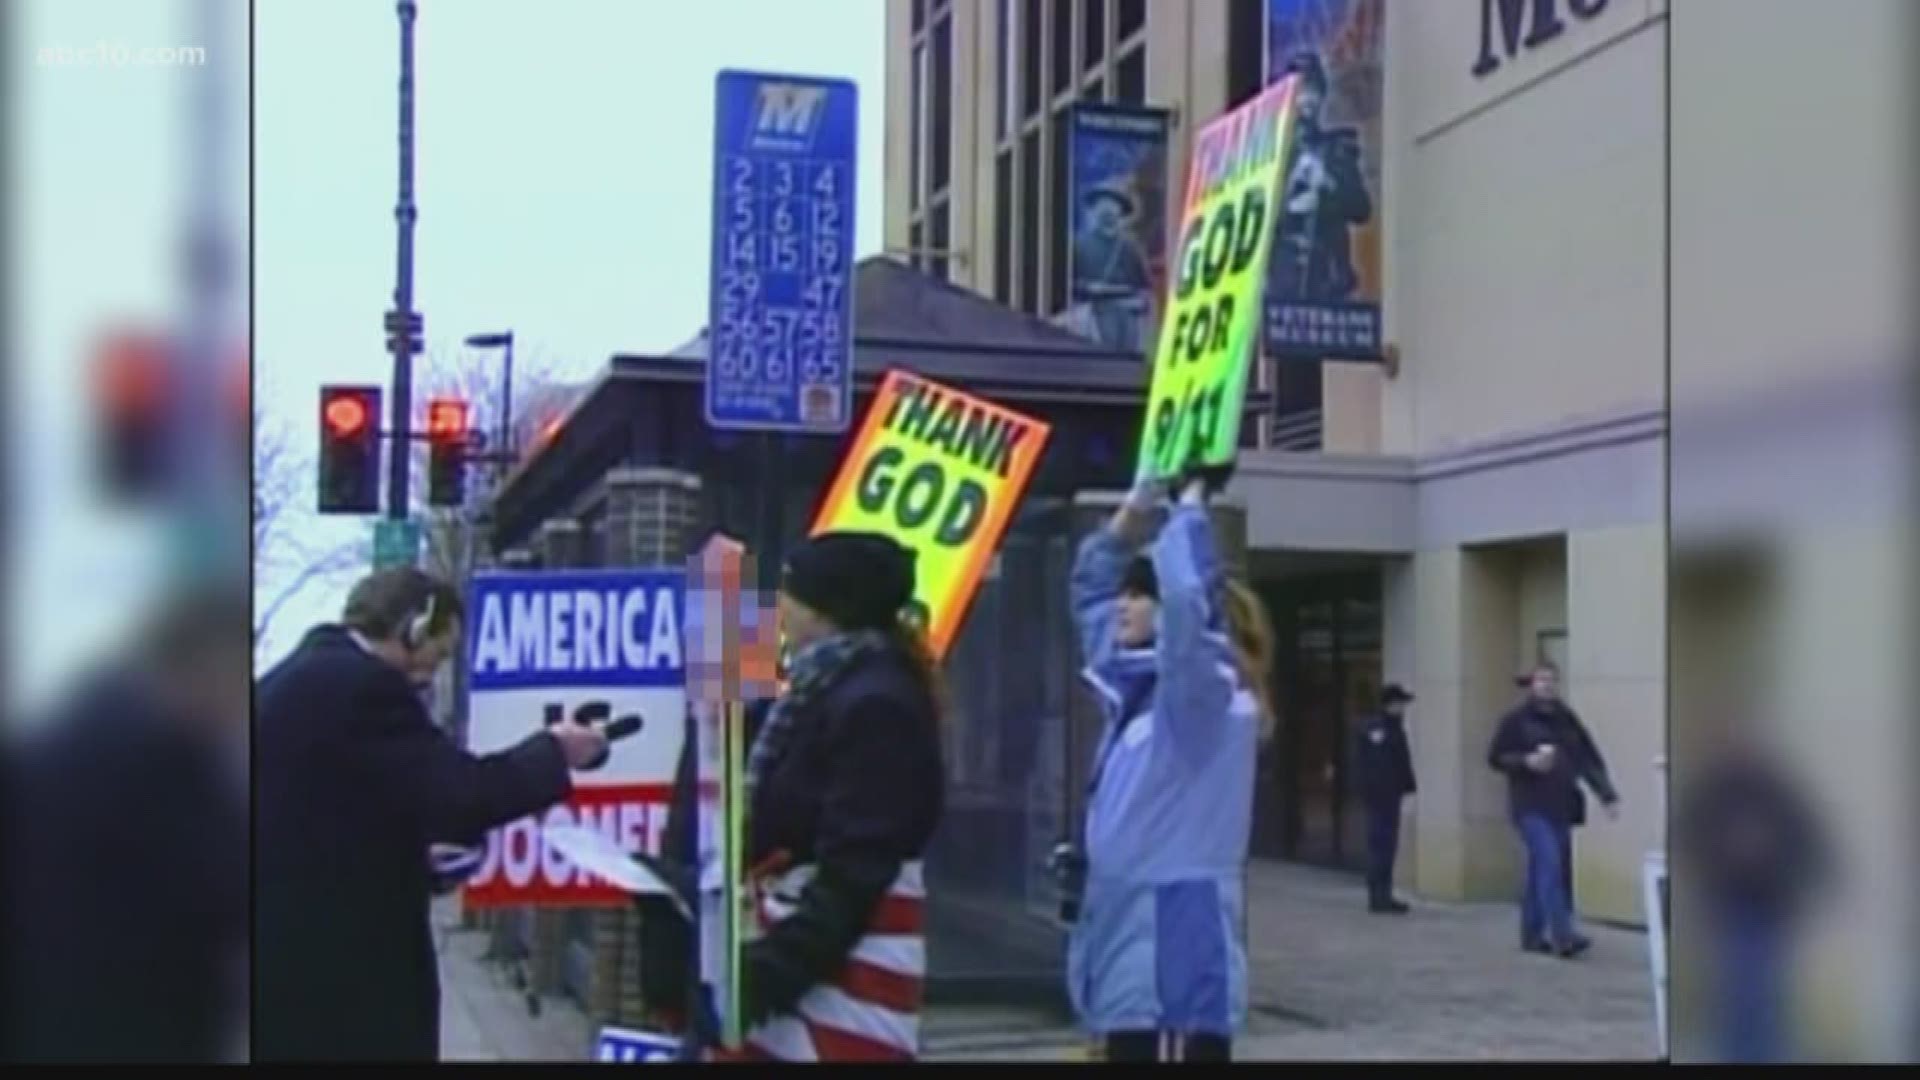 Westboro Baptist Church to protest in Sacramento (May 7, 2018)